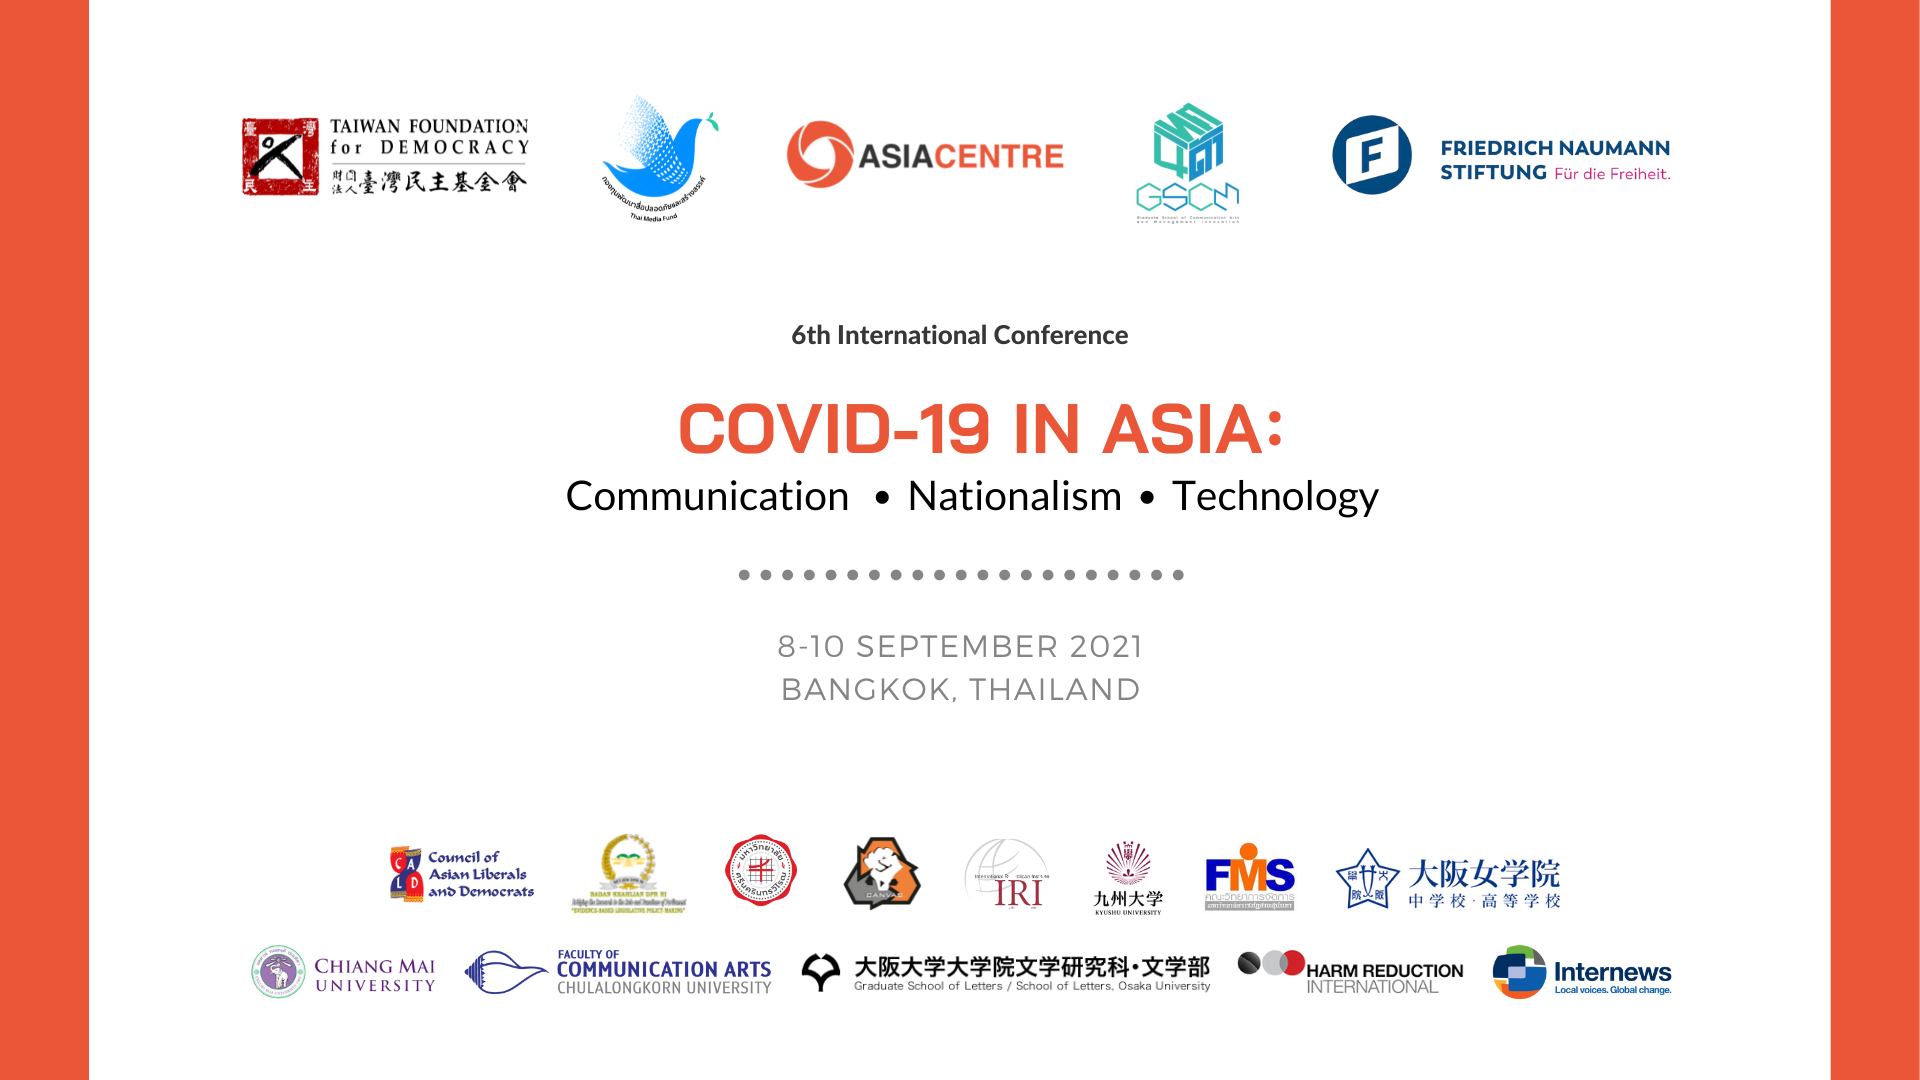 COVID-19 in Asia: Communication, Nationalism and Technology